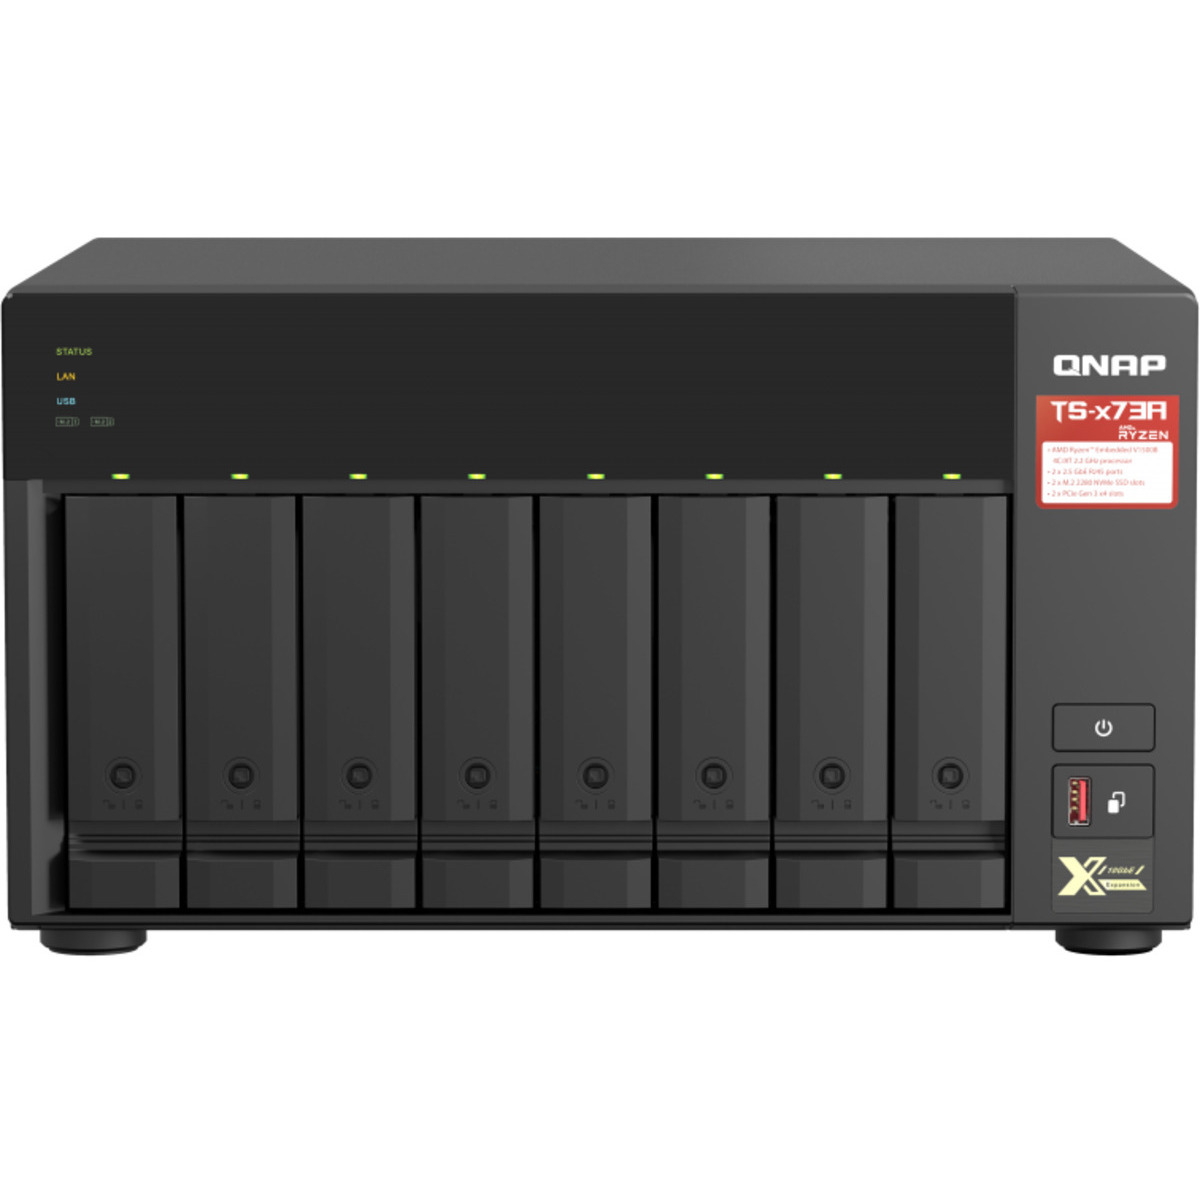 QNAP TS-873A 40tb 8-Bay Desktop Multimedia / Power User / Business NAS - Network Attached Storage Device 4x10tb Seagate IronWolf Pro ST10000NT001 3.5 7200rpm SATA 6Gb/s HDD NAS Class Drives Installed - Burn-In Tested - ON SALE TS-873A